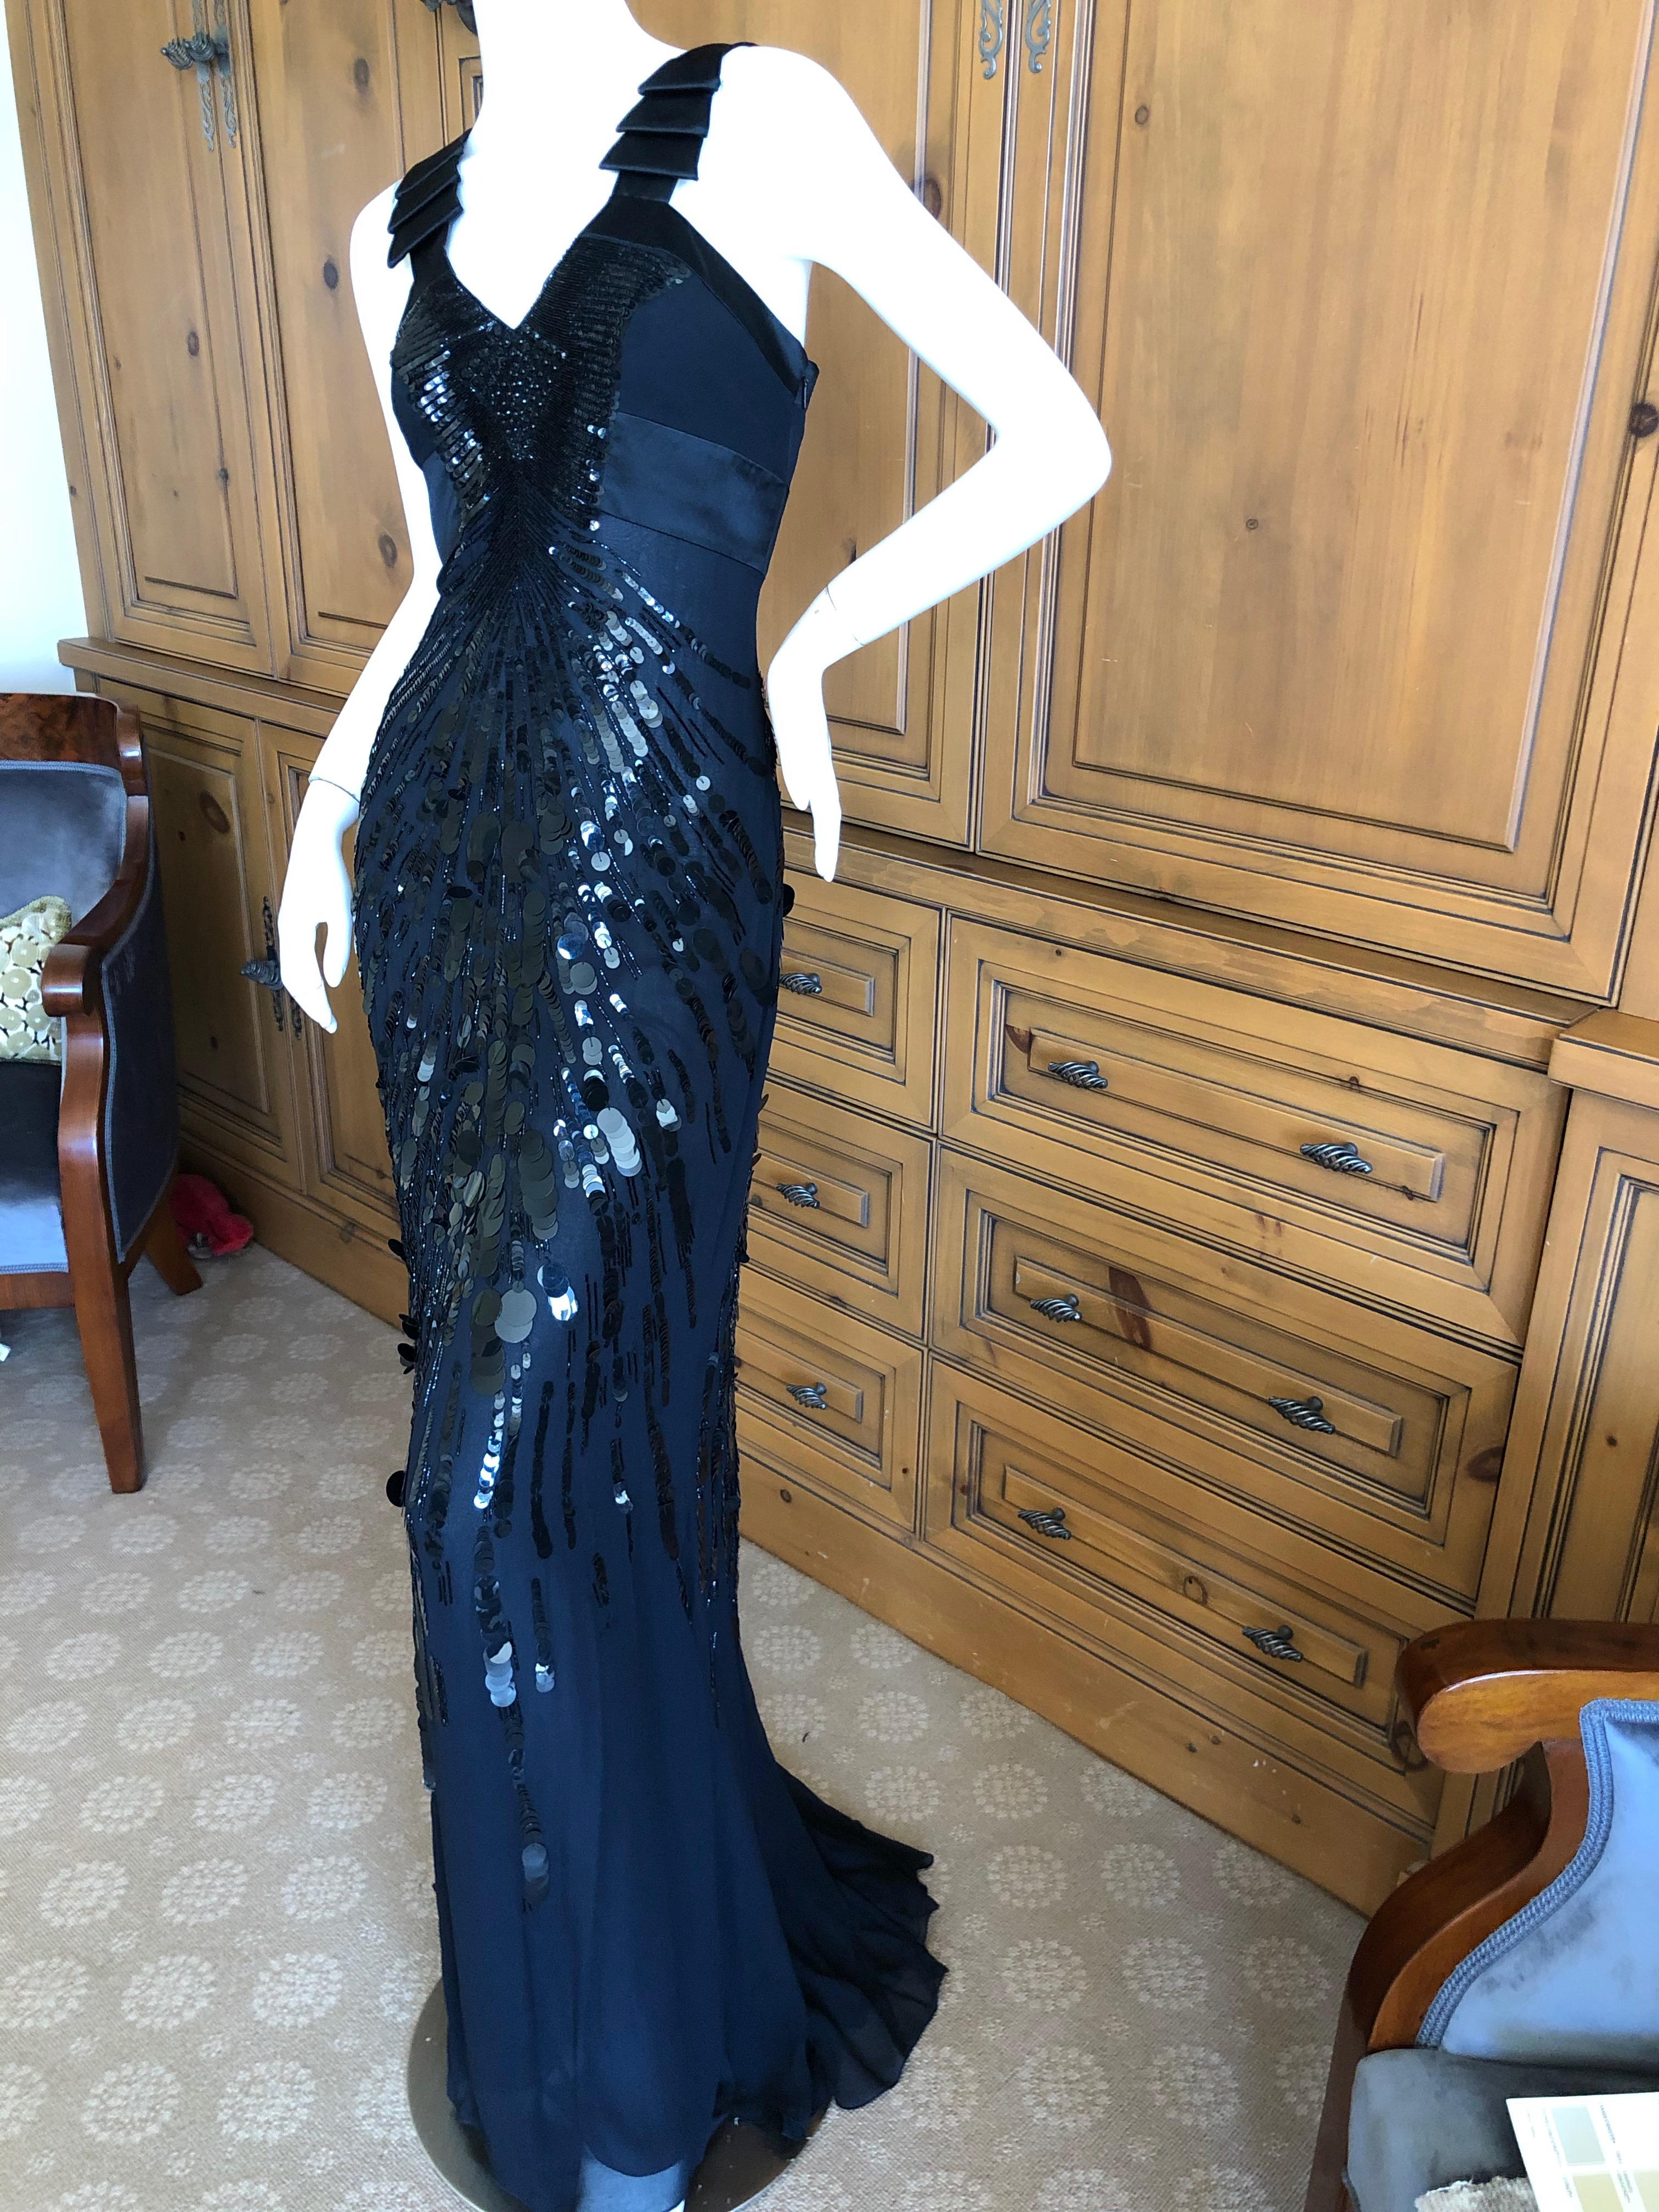  Versace Sequin and Bead Embellished Vintage Black Evening Dress In Excellent Condition For Sale In Cloverdale, CA